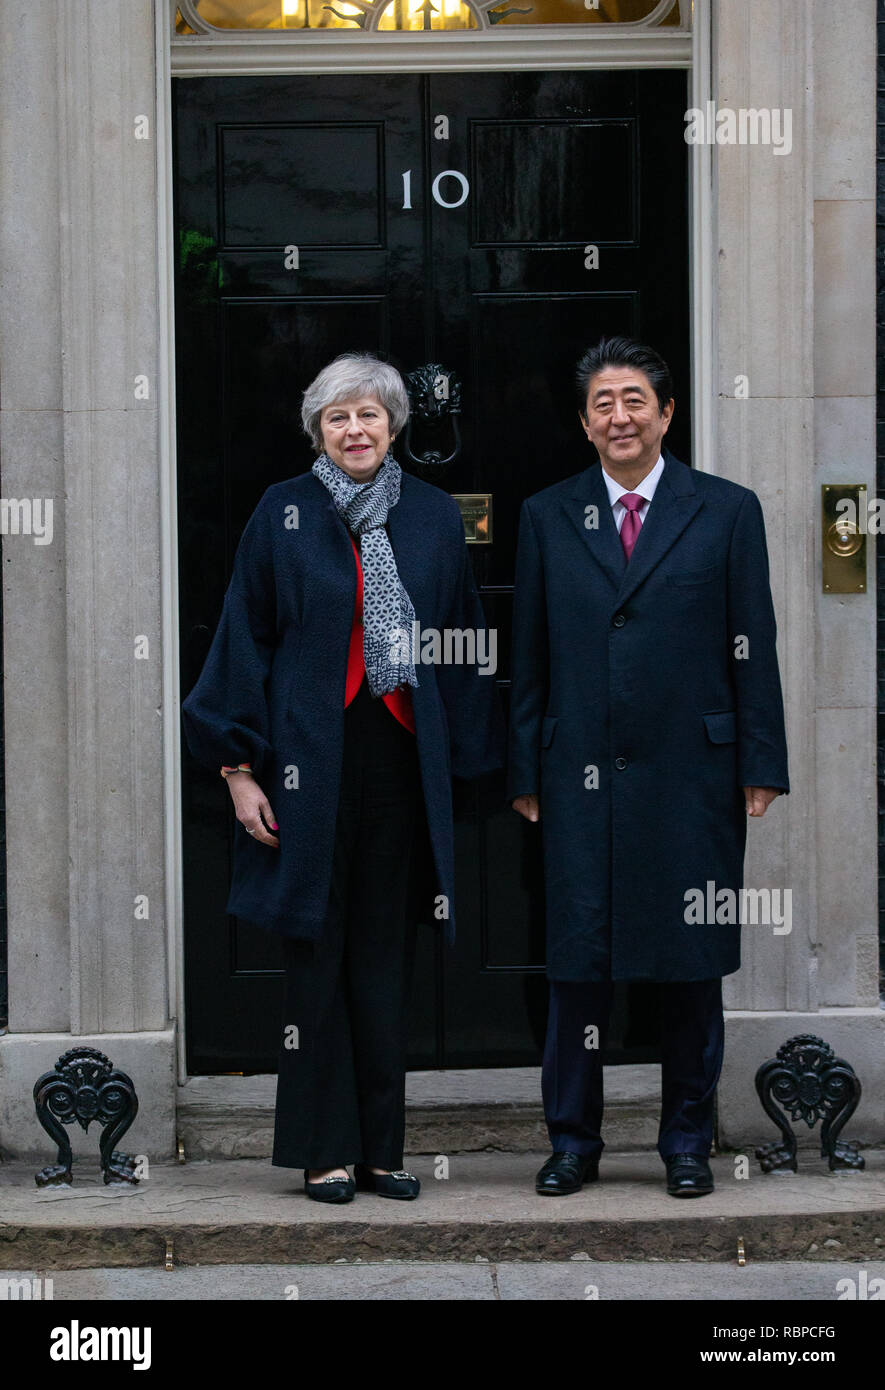 Theresa May, British Prime Minister, meets Shinzo Abe, the Prime Minister of Japan, for talks at 10 Downing Street. Stock Photo